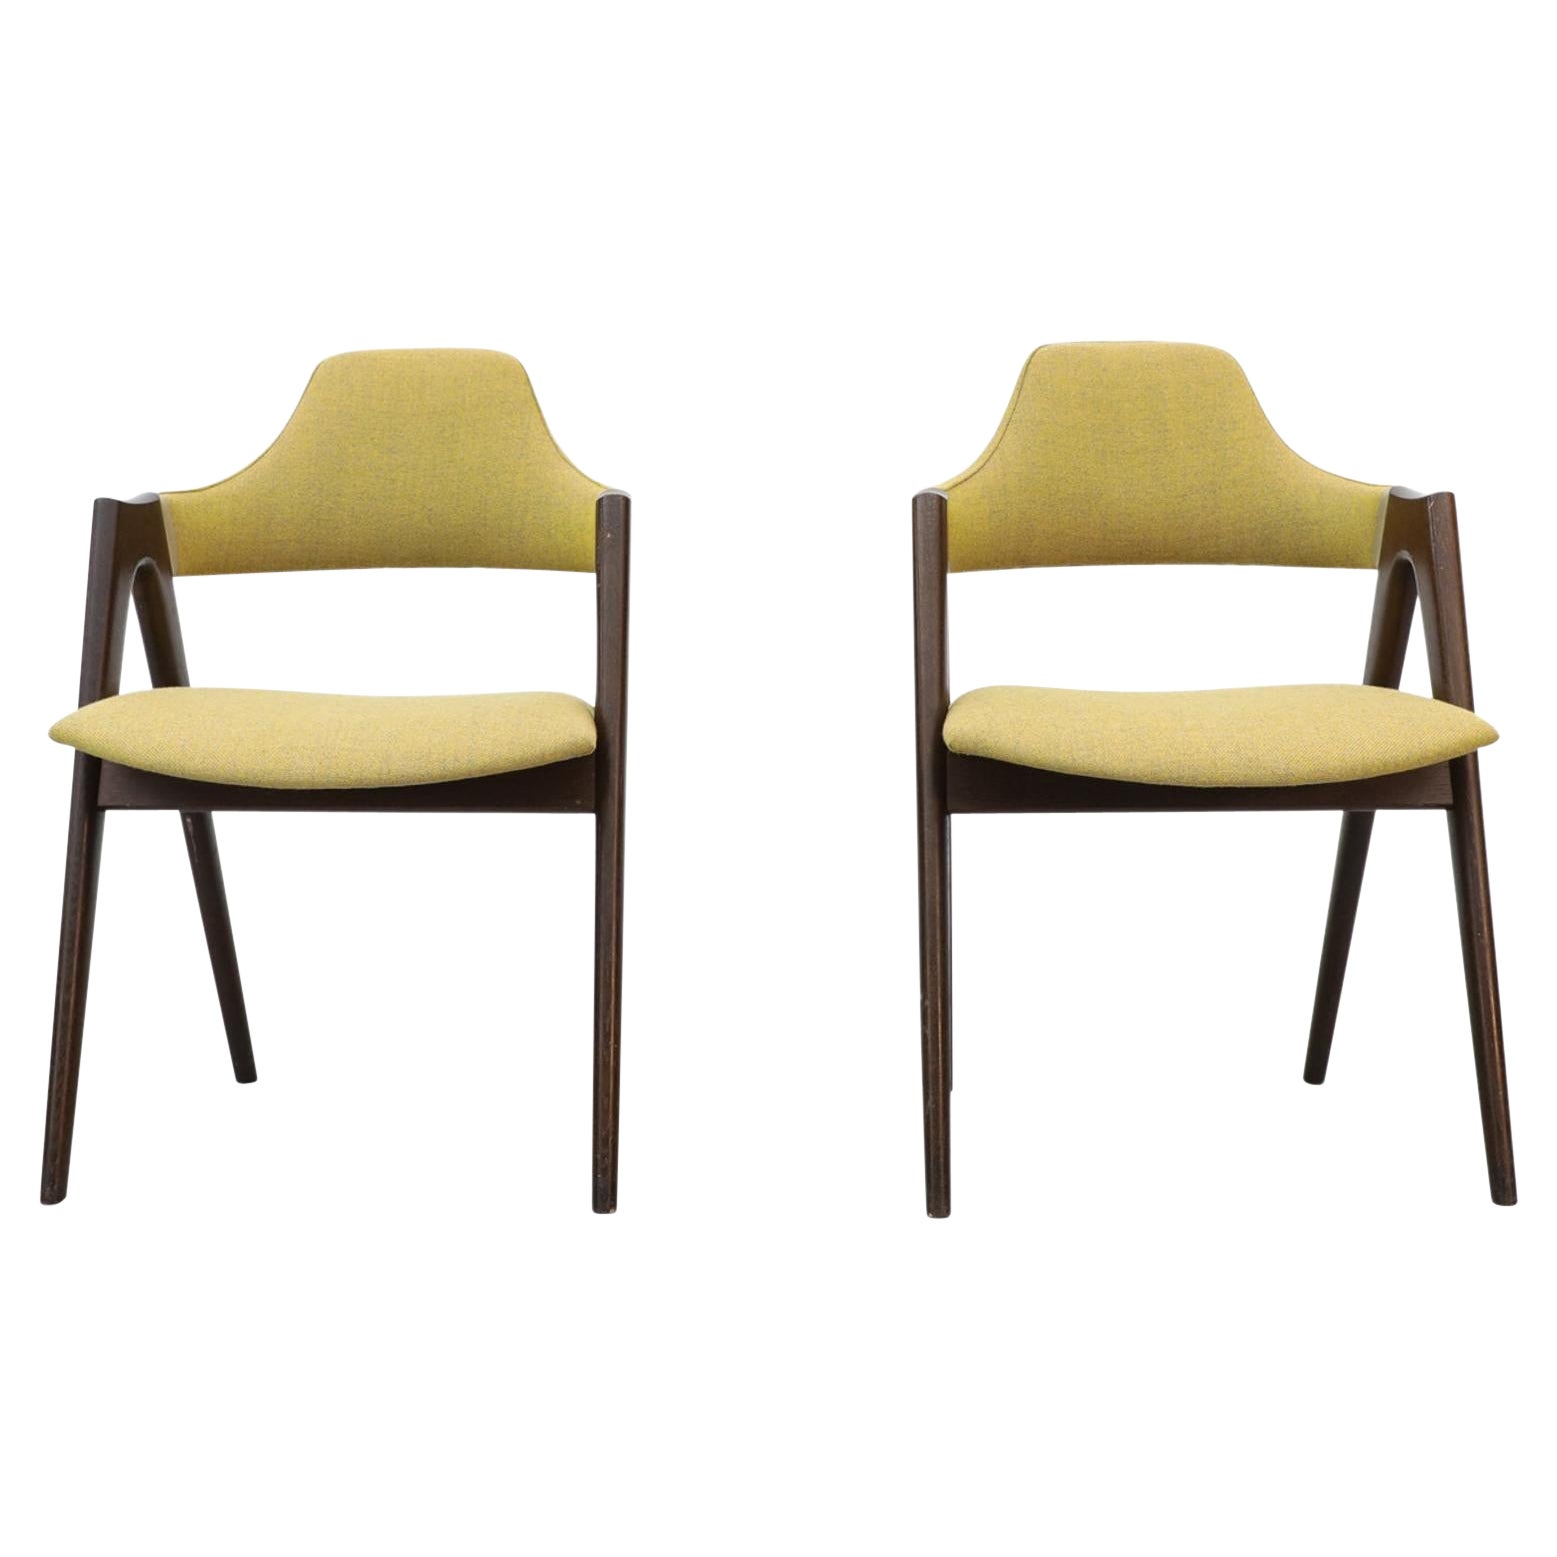 Pair of Kai Kristiansen Dark Stained Wood Framed Compass Chairs in Kiwi Fabric For Sale